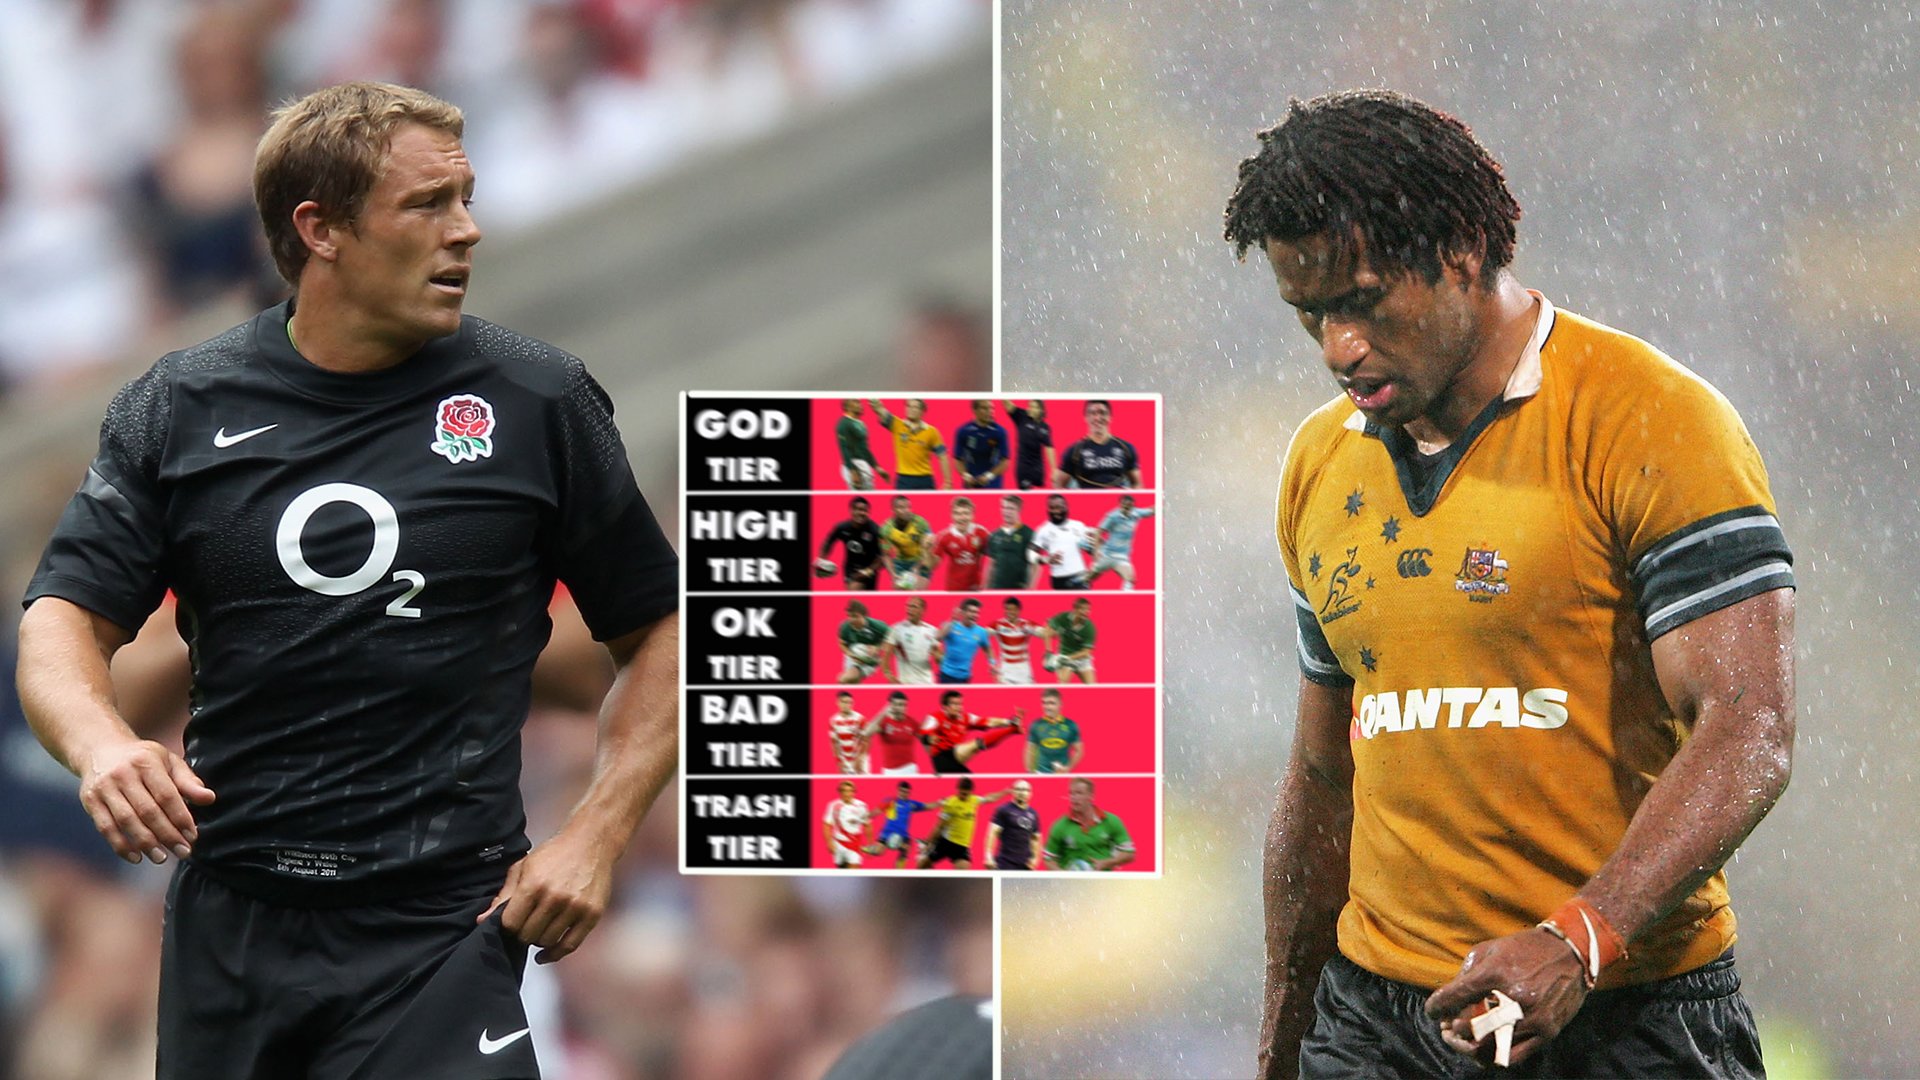 Someone has ranked every rugby kit from World Class to awful